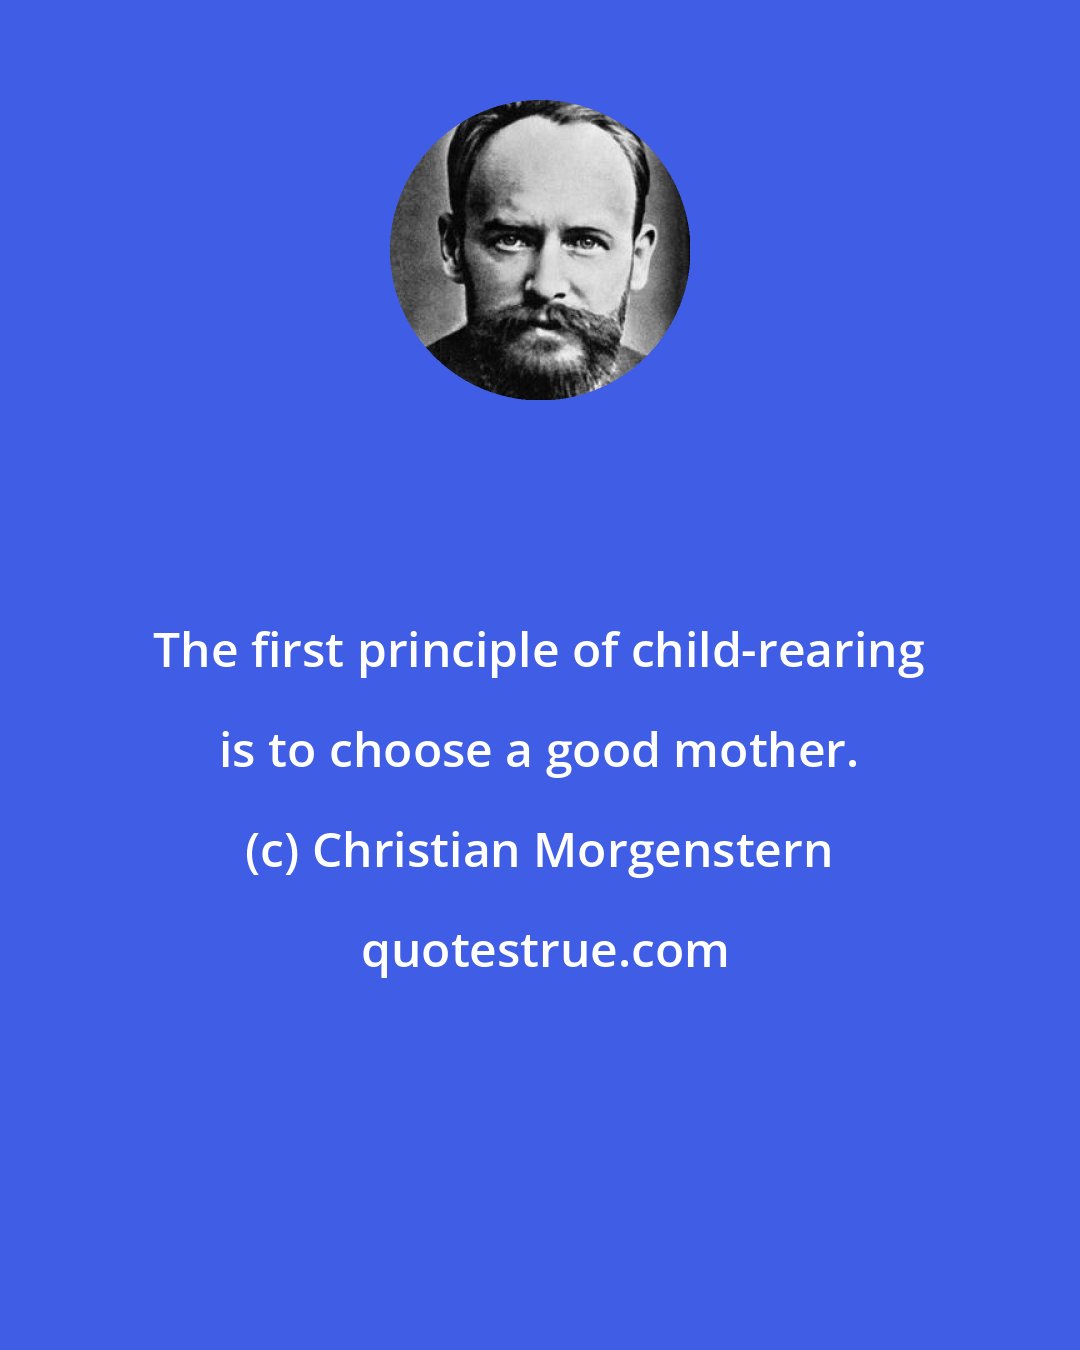 Christian Morgenstern: The first principle of child-rearing is to choose a good mother.